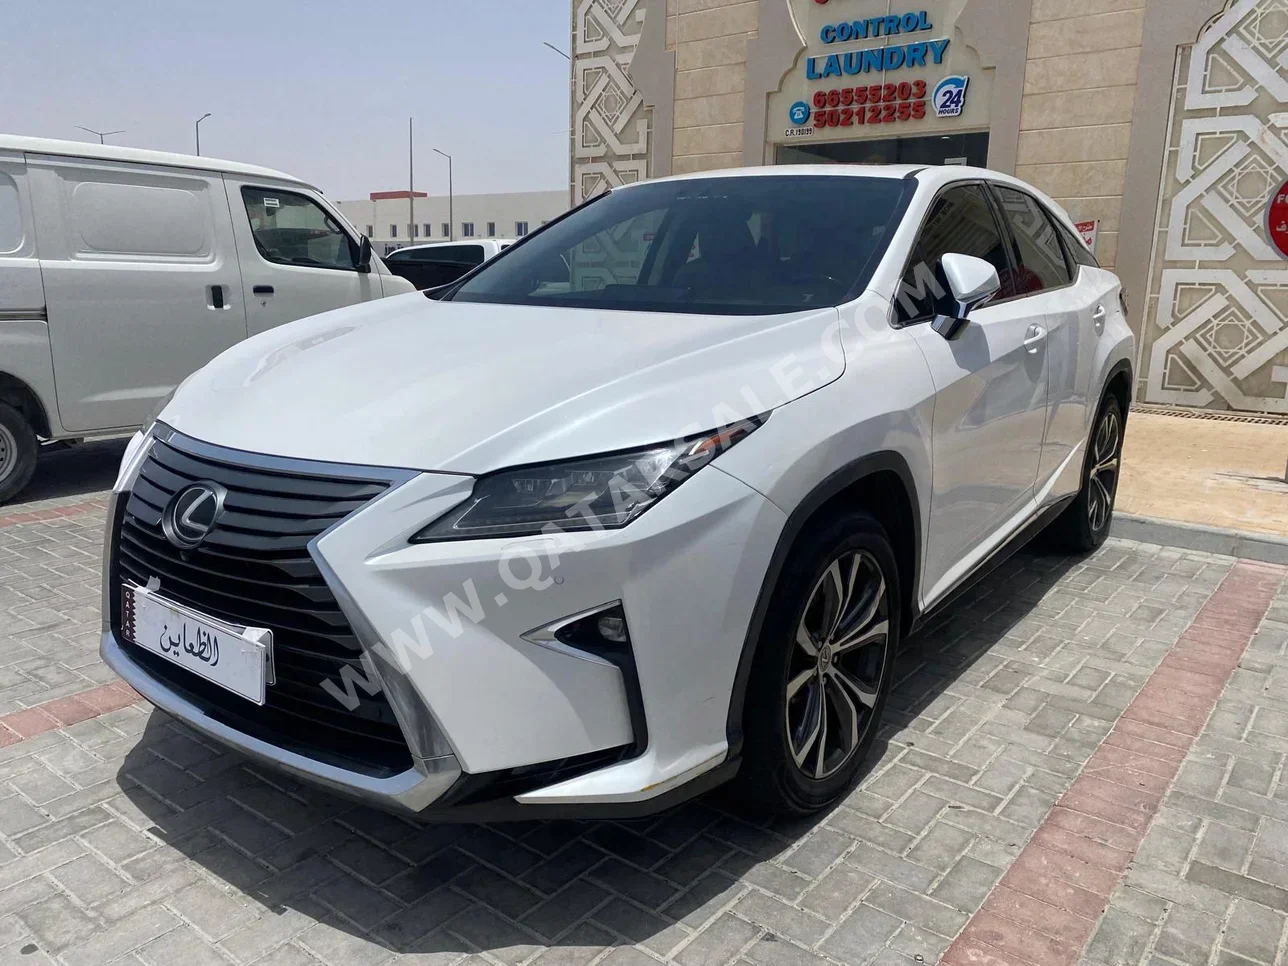 Lexus  RX  350  2016  Automatic  169,000 Km  6 Cylinder  Four Wheel Drive (4WD)  SUV  White